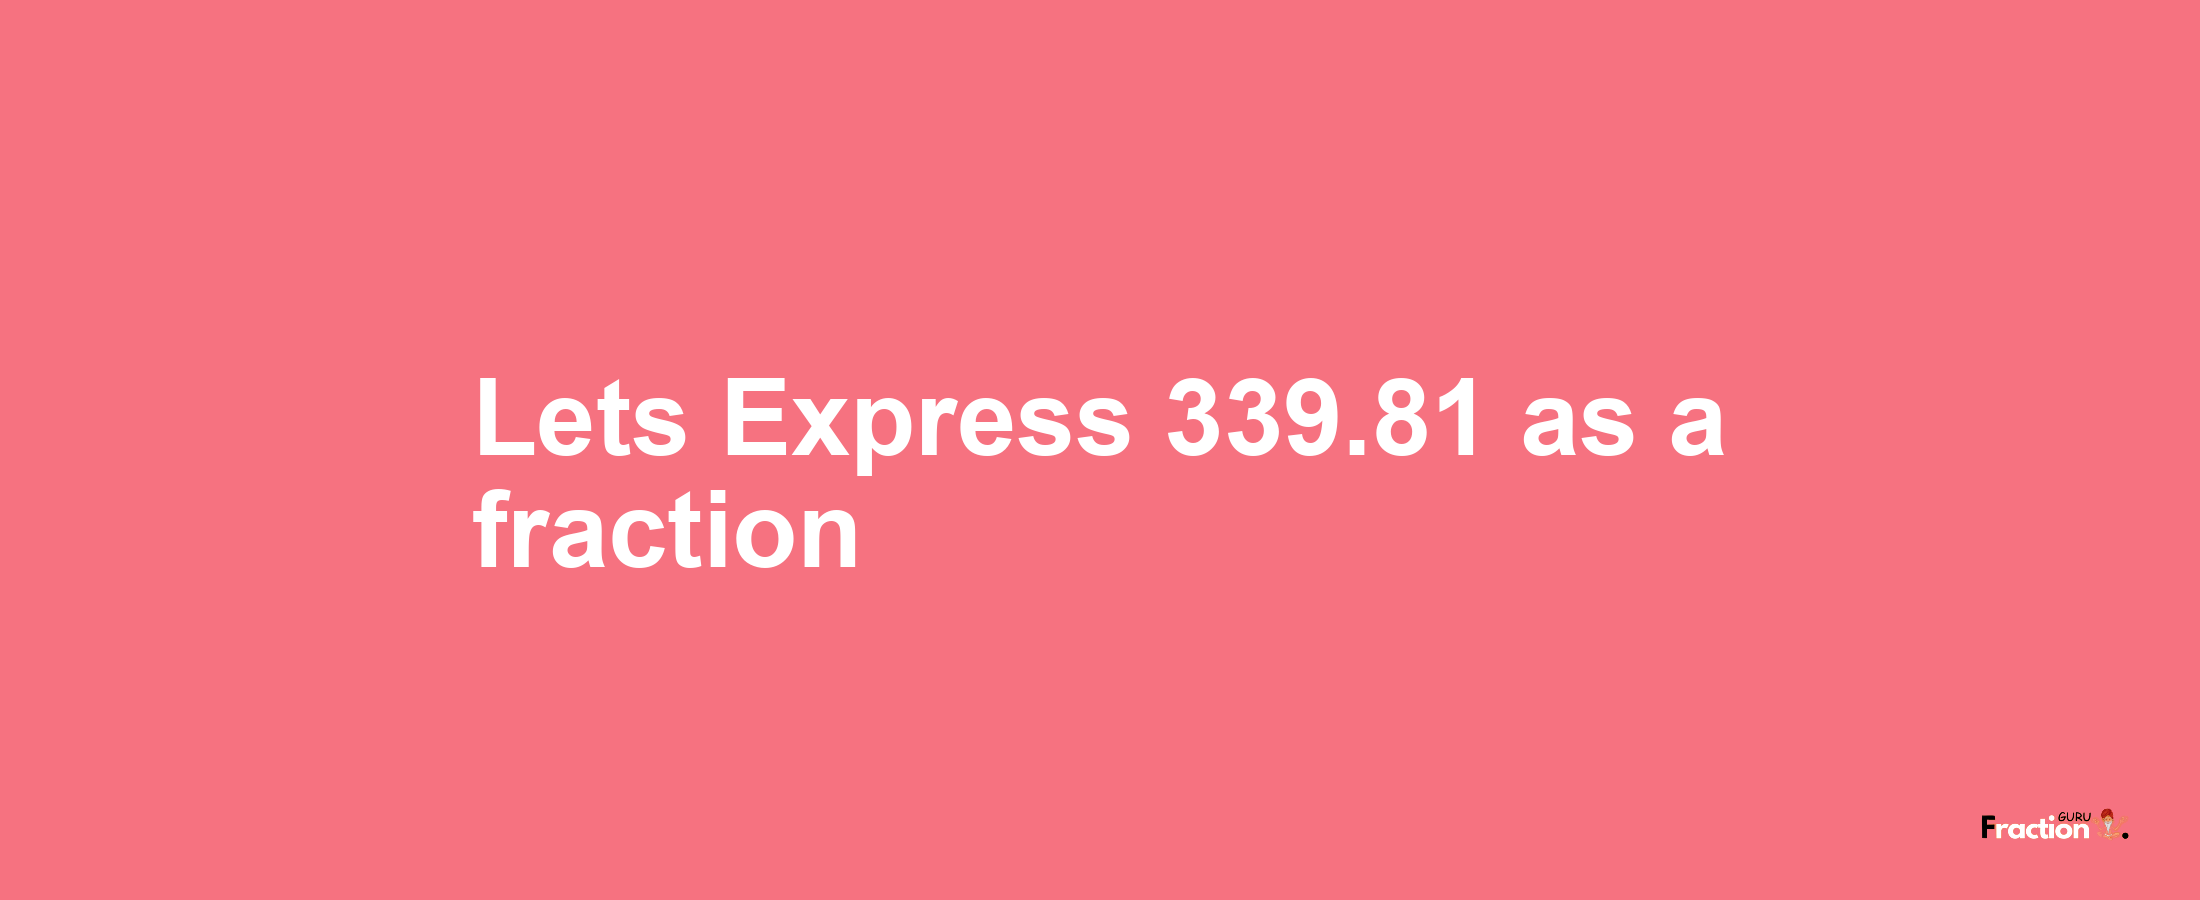 Lets Express 339.81 as afraction